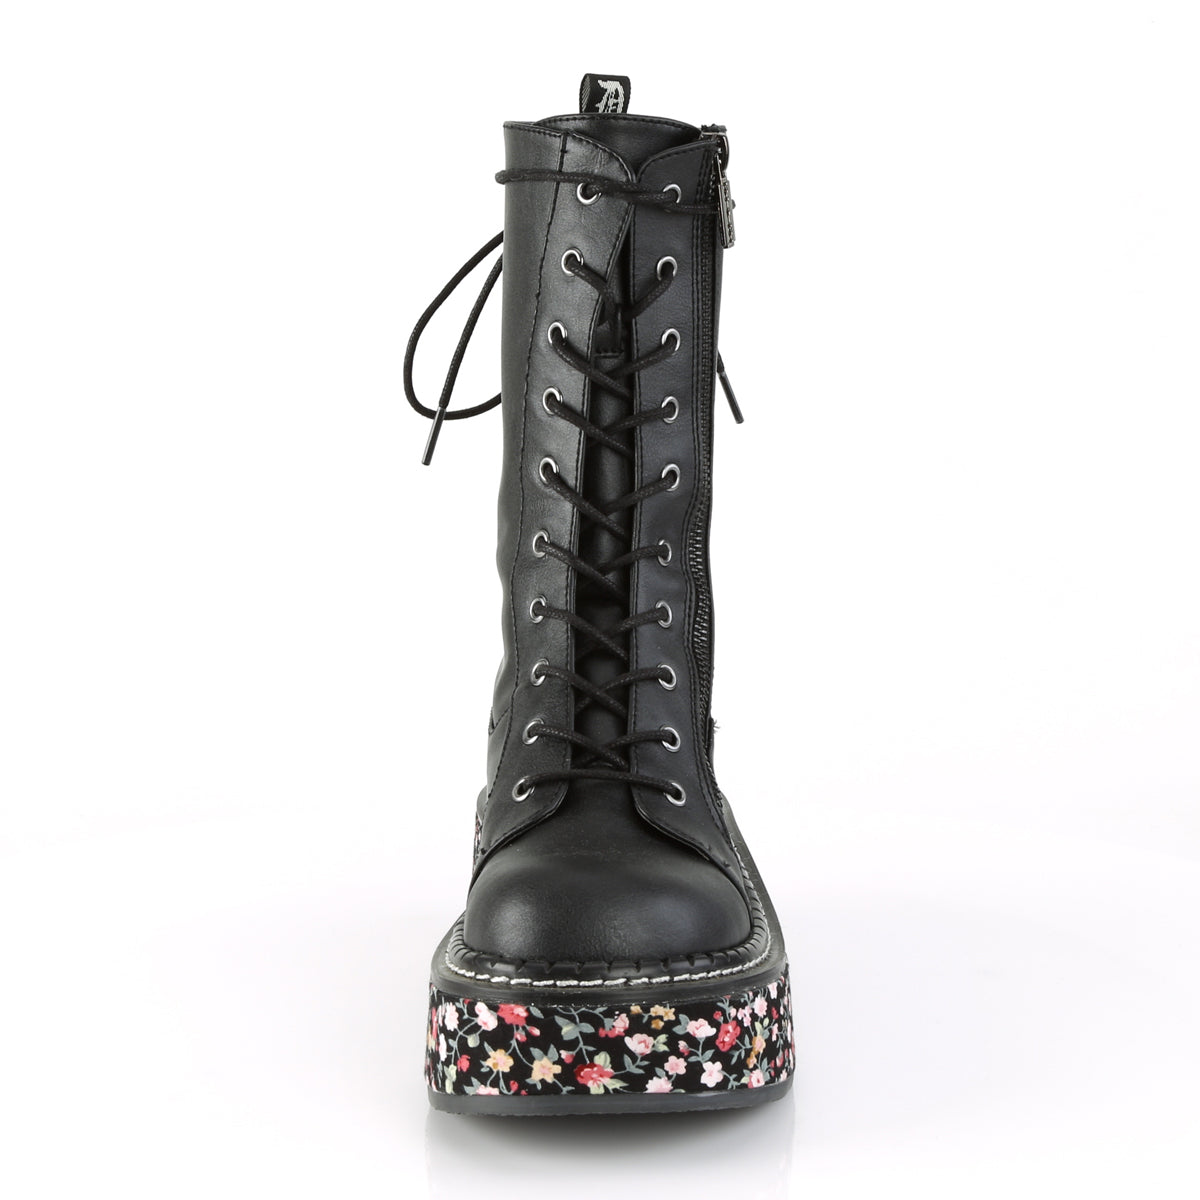 DemoniaCult Womens Boots EMILY-350 Blk Vegan Leather-Floral Fabric